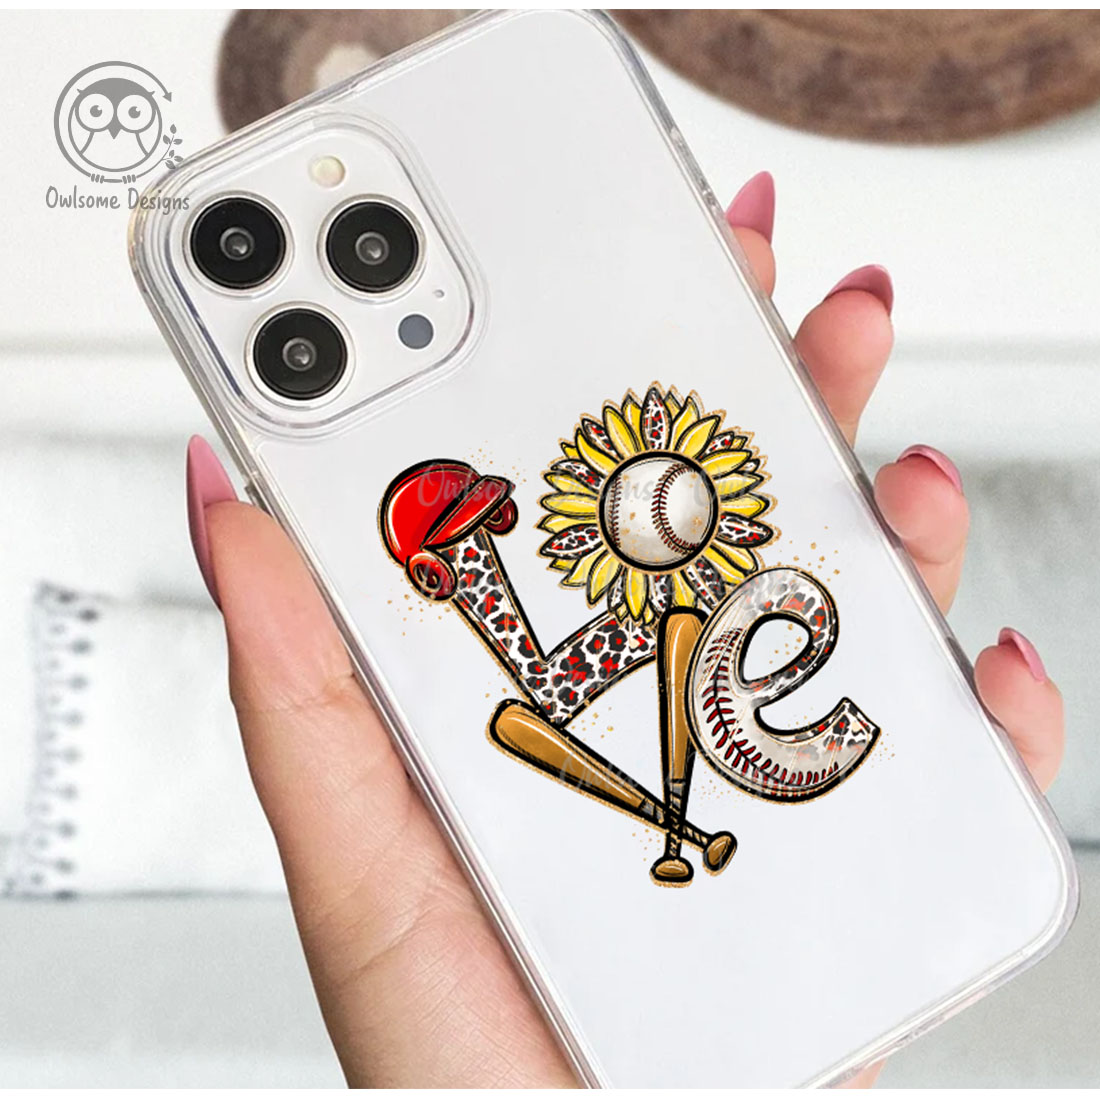 Image of a phone case with a colorful inscription Love with baseball elements.